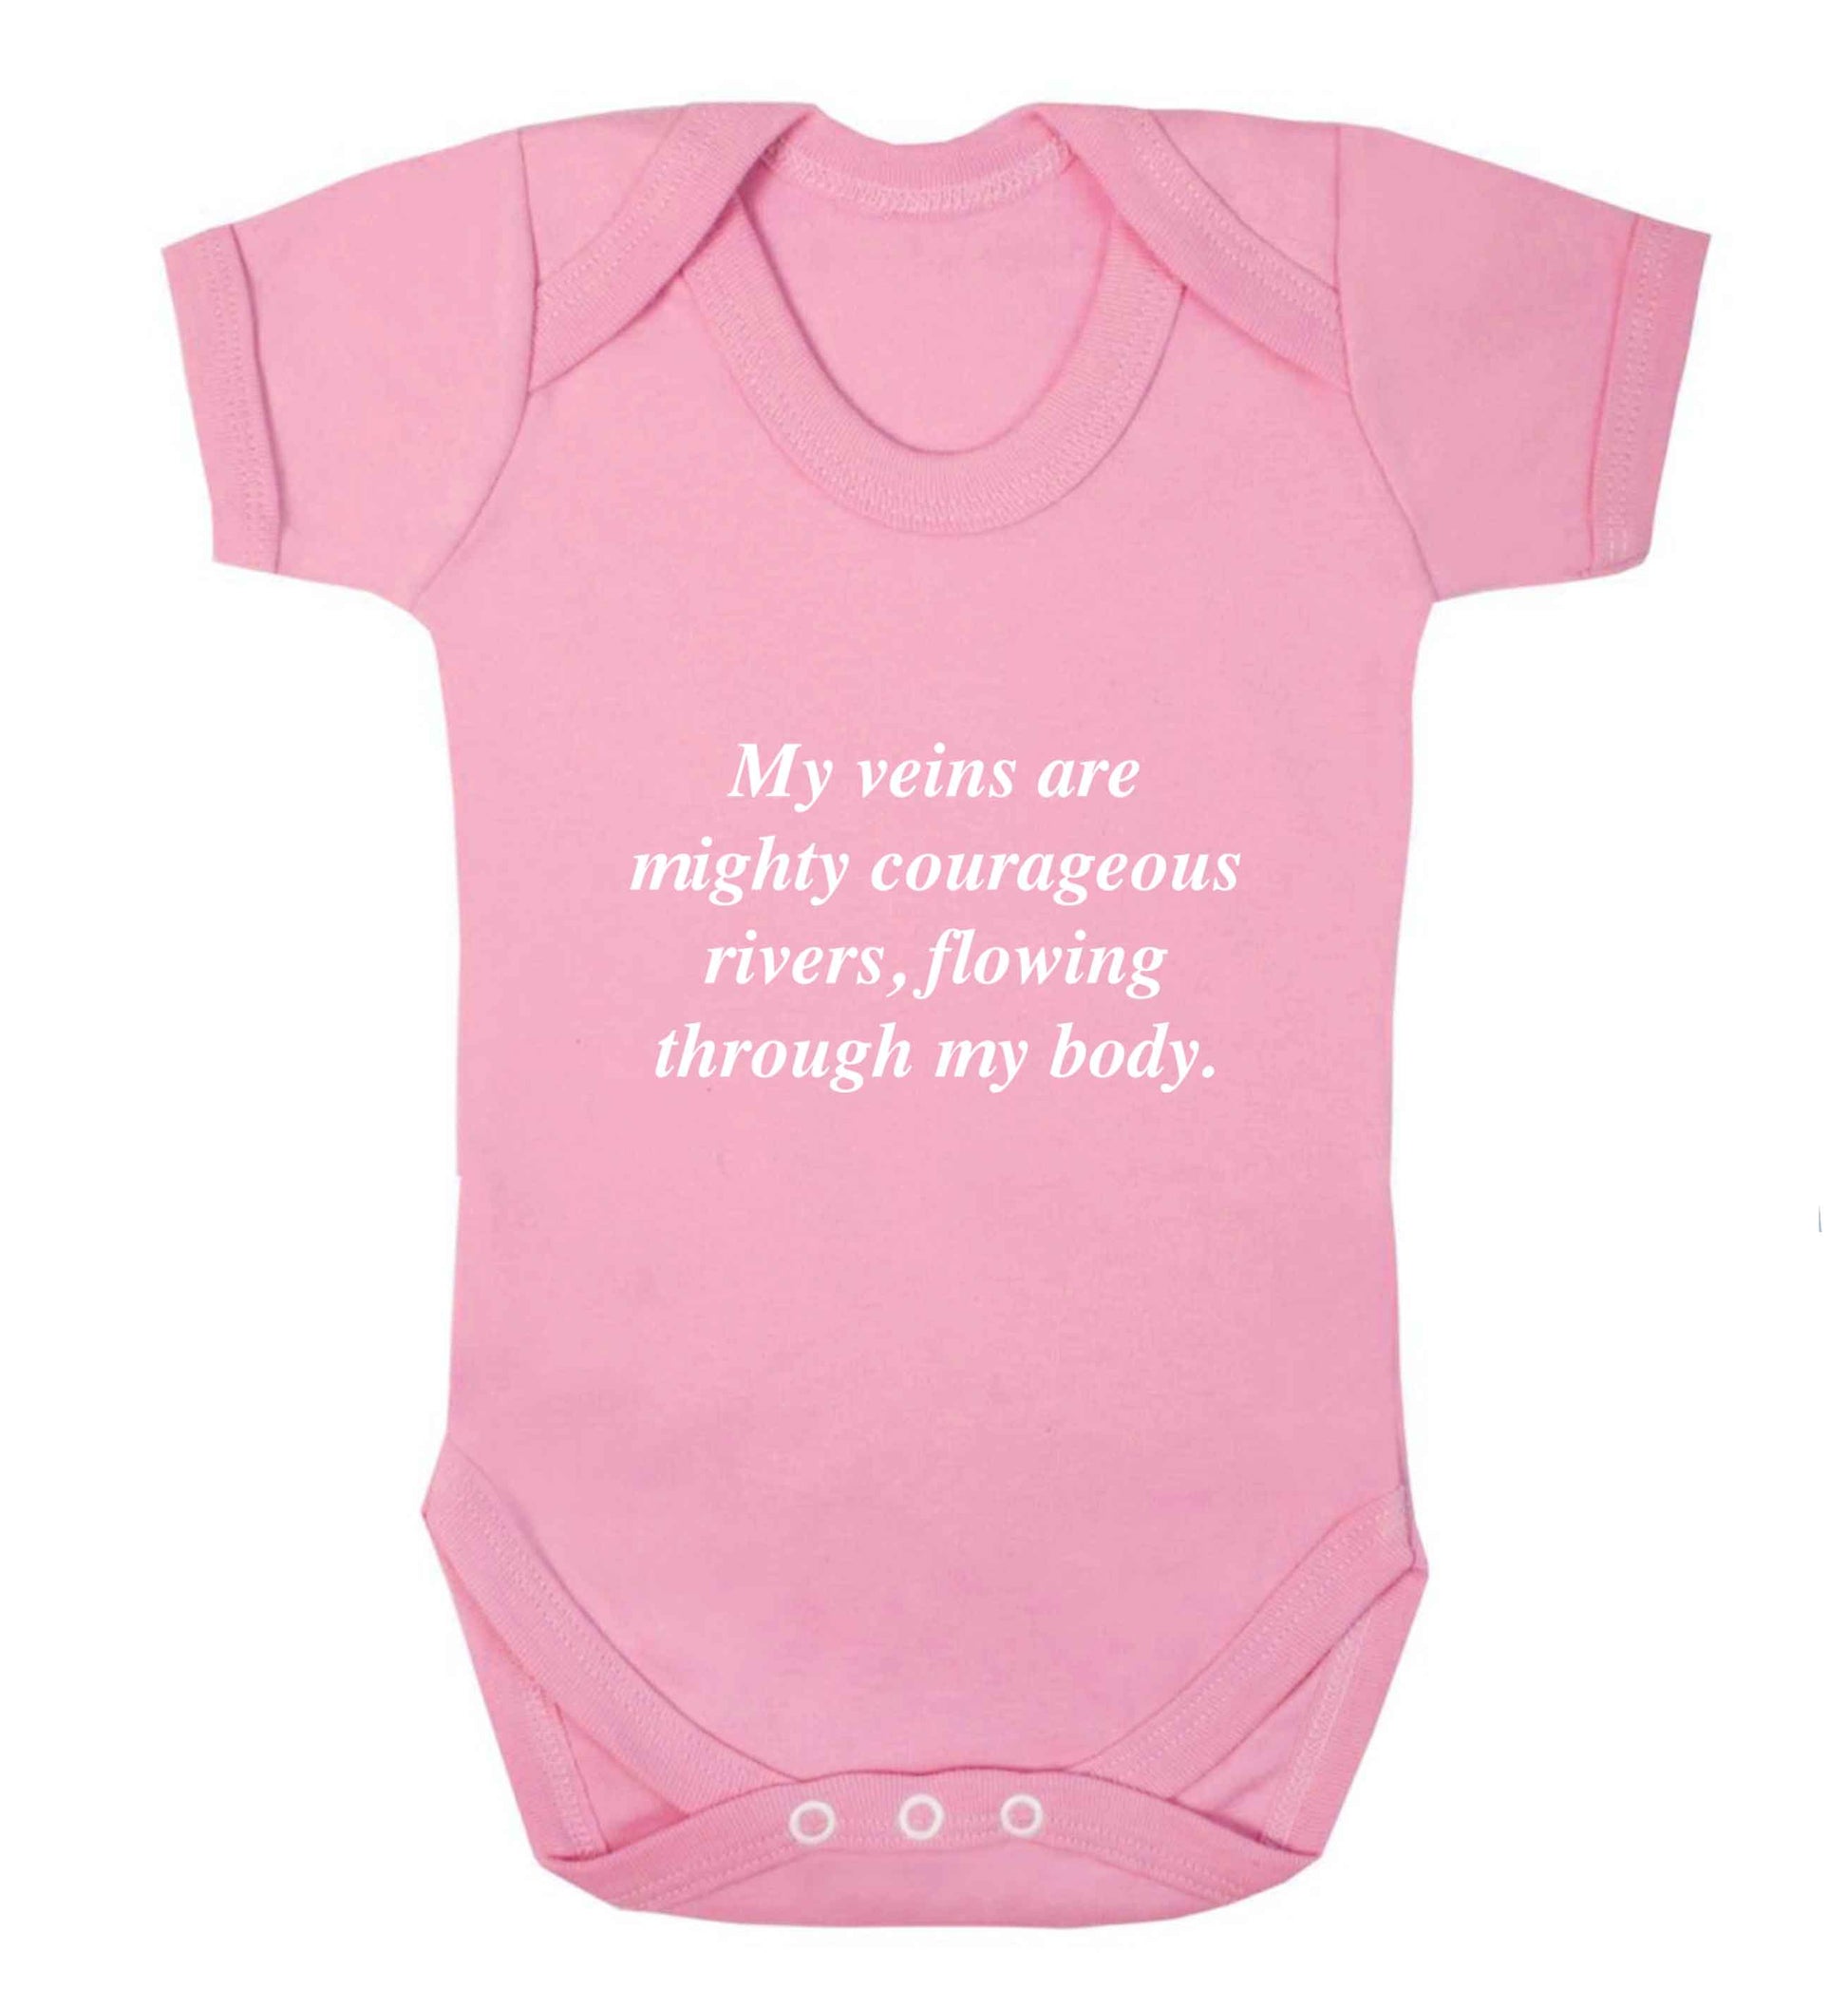 My veins are mighty courageous rivers, flowing through my body baby vest pale pink 18-24 months